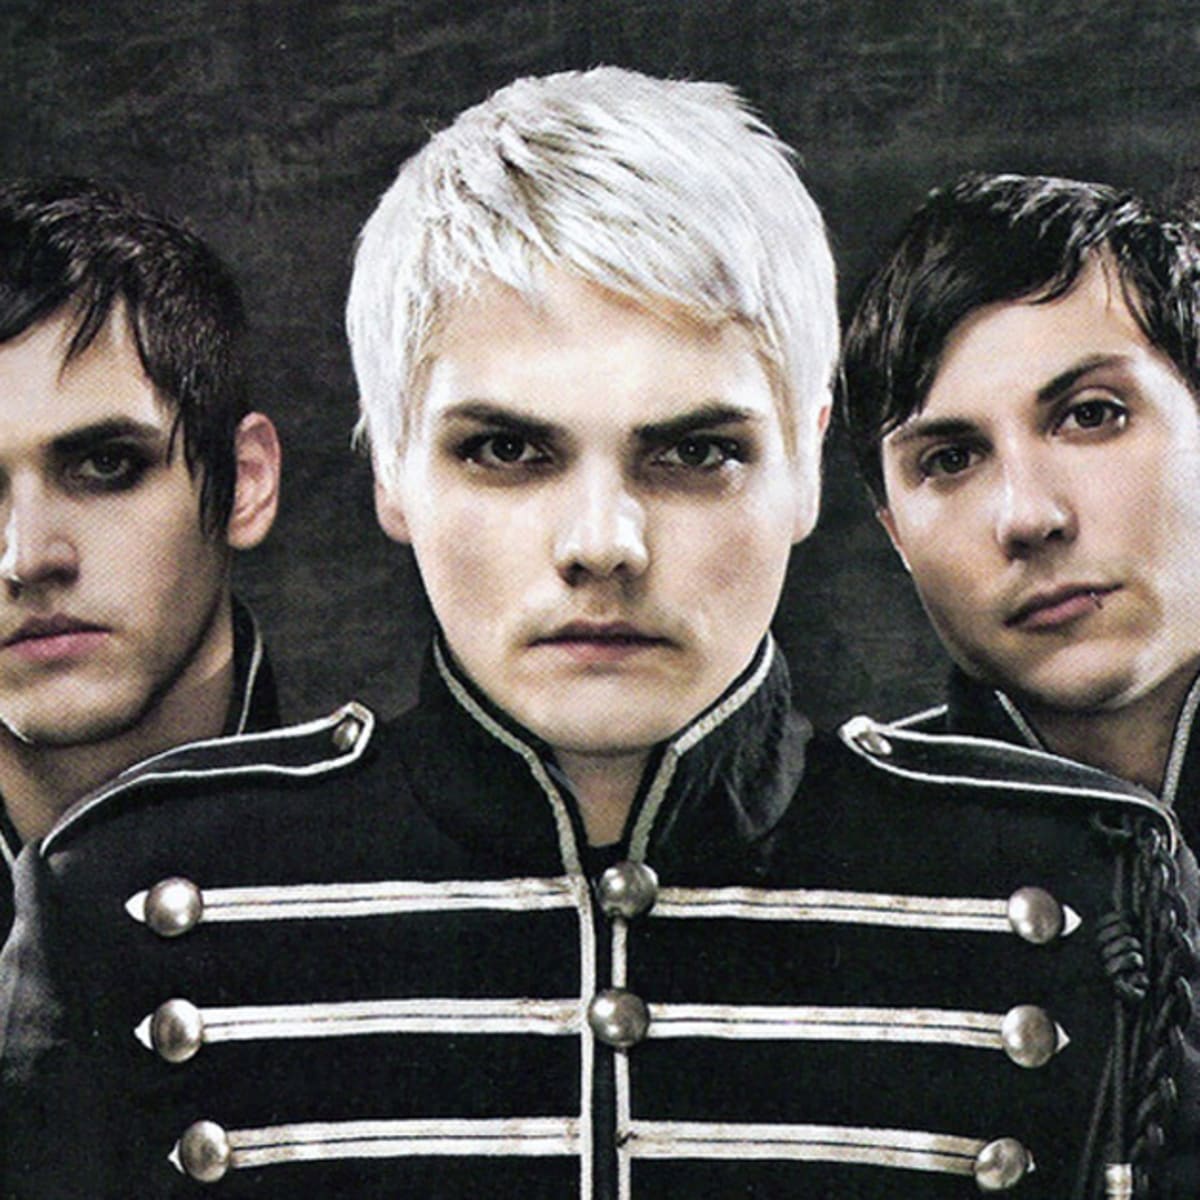 Band My Chemical Romance ends run